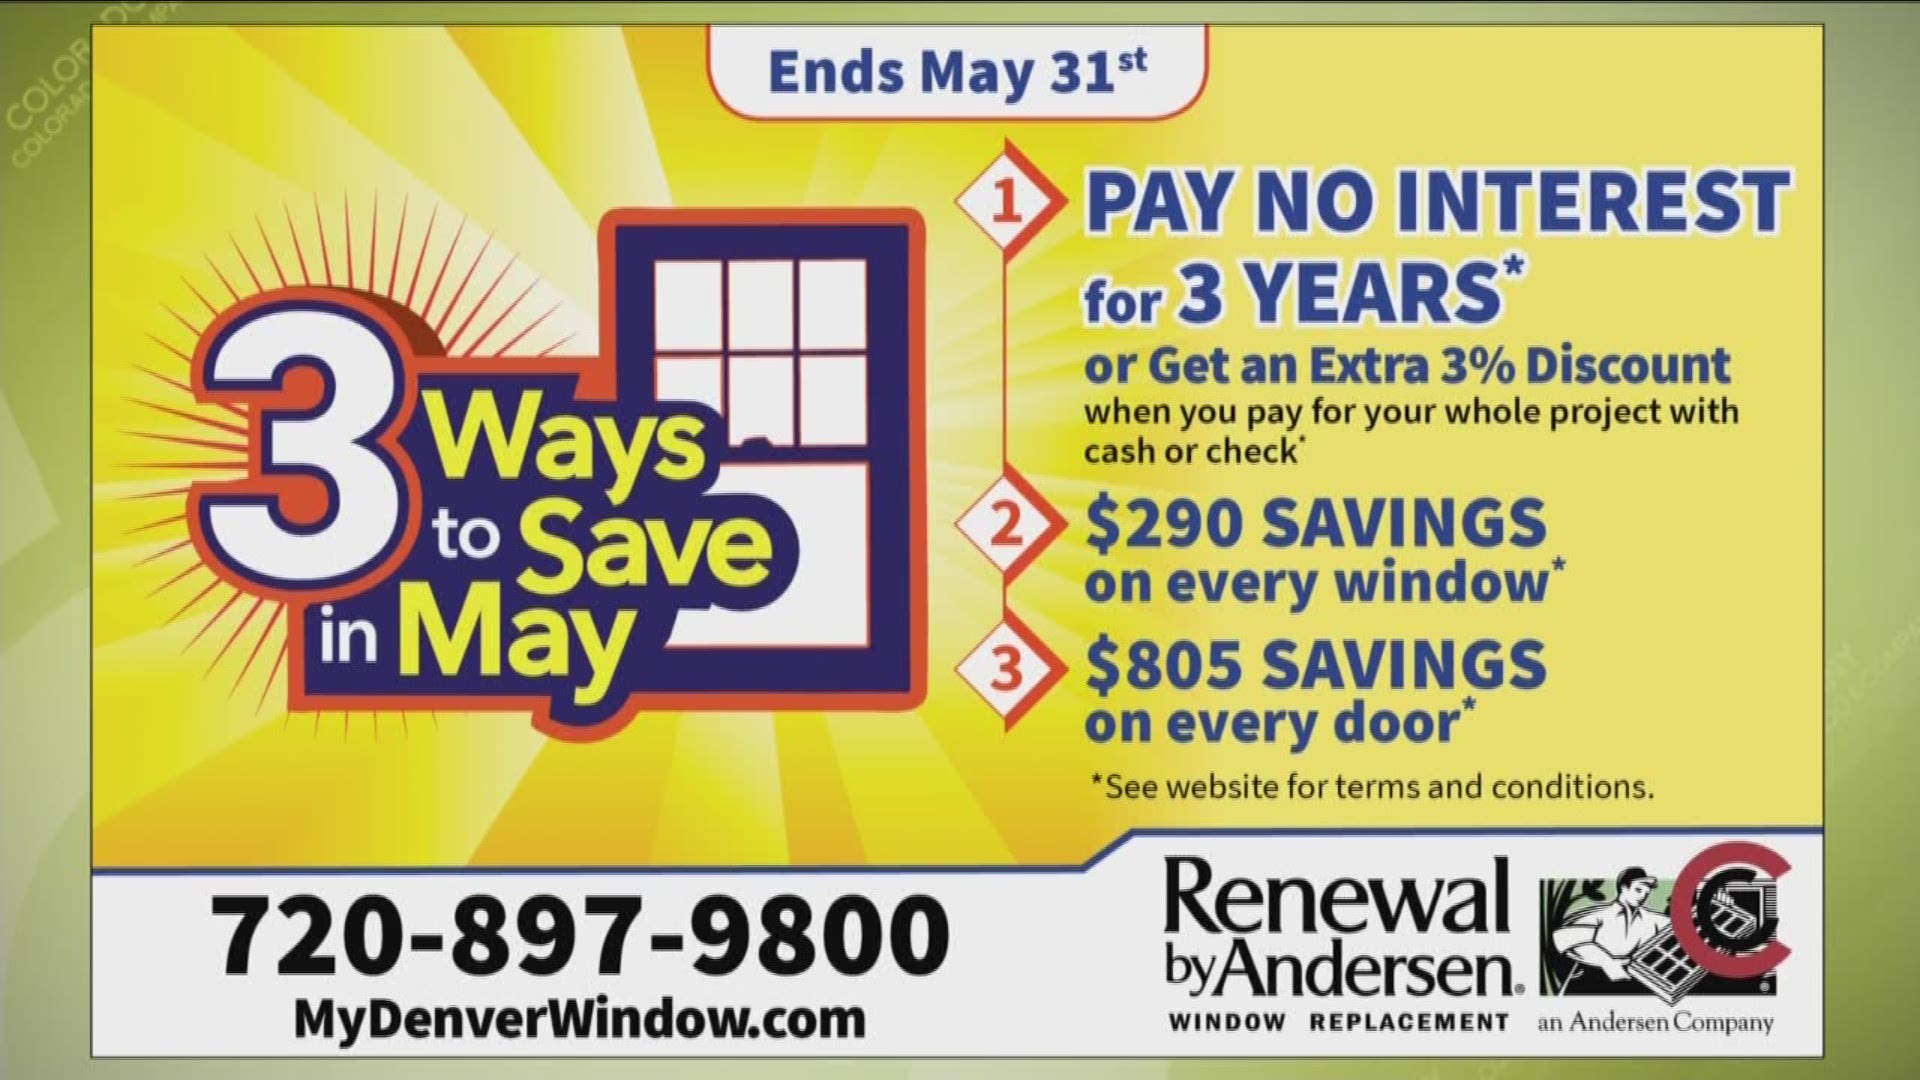 Renewal by Andersen’s 3 Ways to Save in May Sale is on until May 31st. Save $290 on every window, save $805 on every patio and entry door! If you pay for your whole project up front in cash or check, you’ll get an extra 3% off. Financing is available with no interest for three years! Call 720.897.9800 or visit www.MyDenverWindow.com to schedule your free window and door diagnosis. 
THIS INTERVIEW HAS COMMERCIAL CONTENT. PRODUCTS AND SERVICES FEATURED APPEAR AS PAID ADVERTISING.